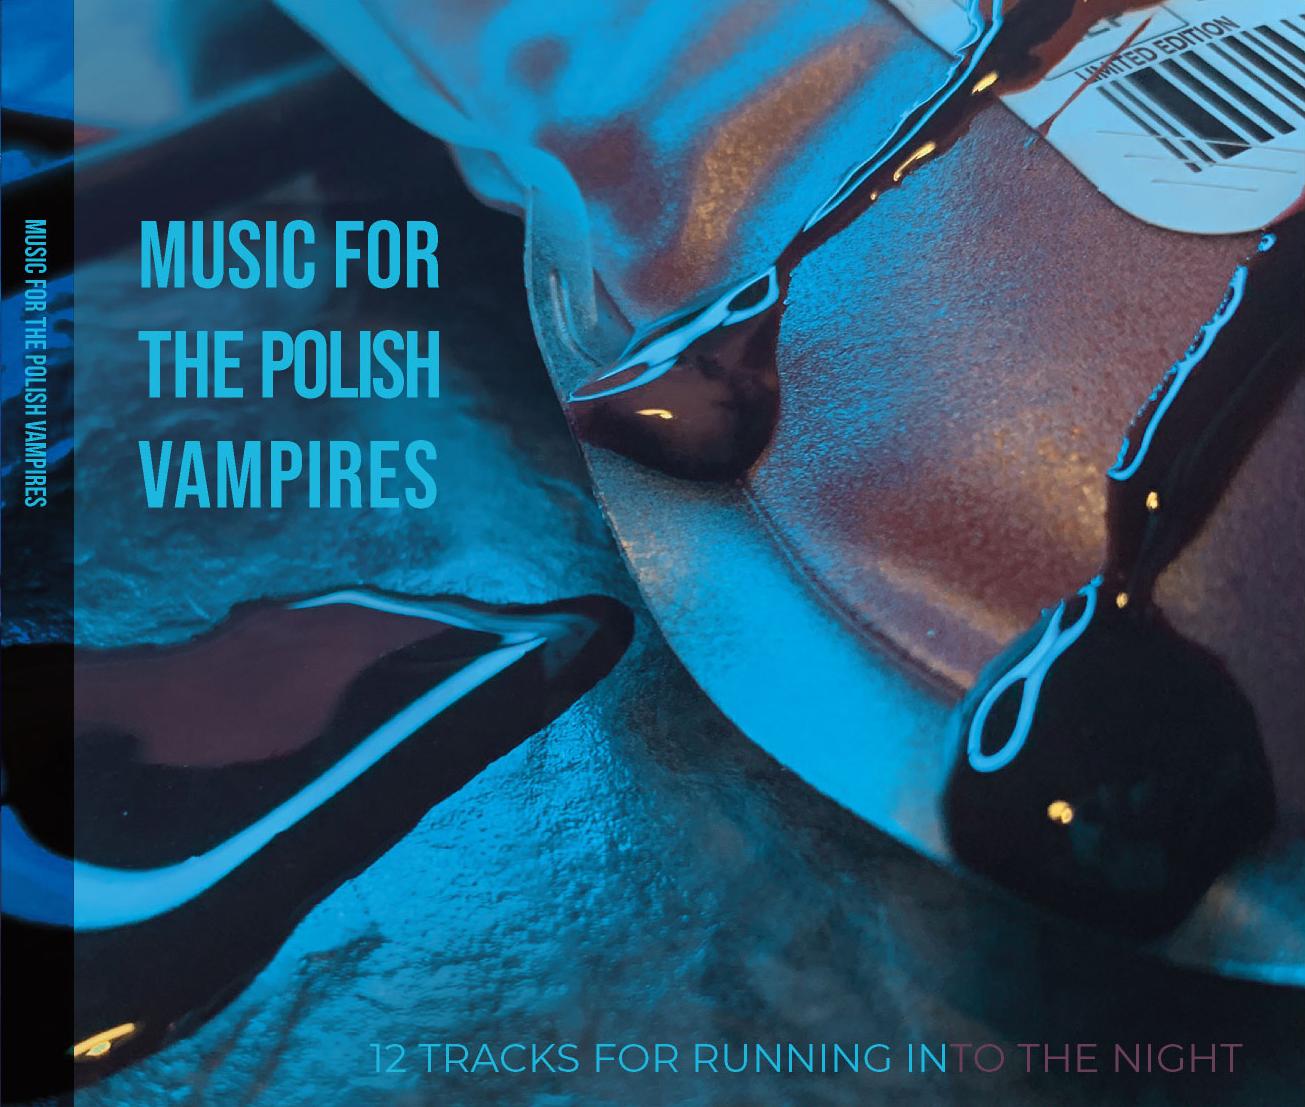 Music for the Polish Vampires - format mp3